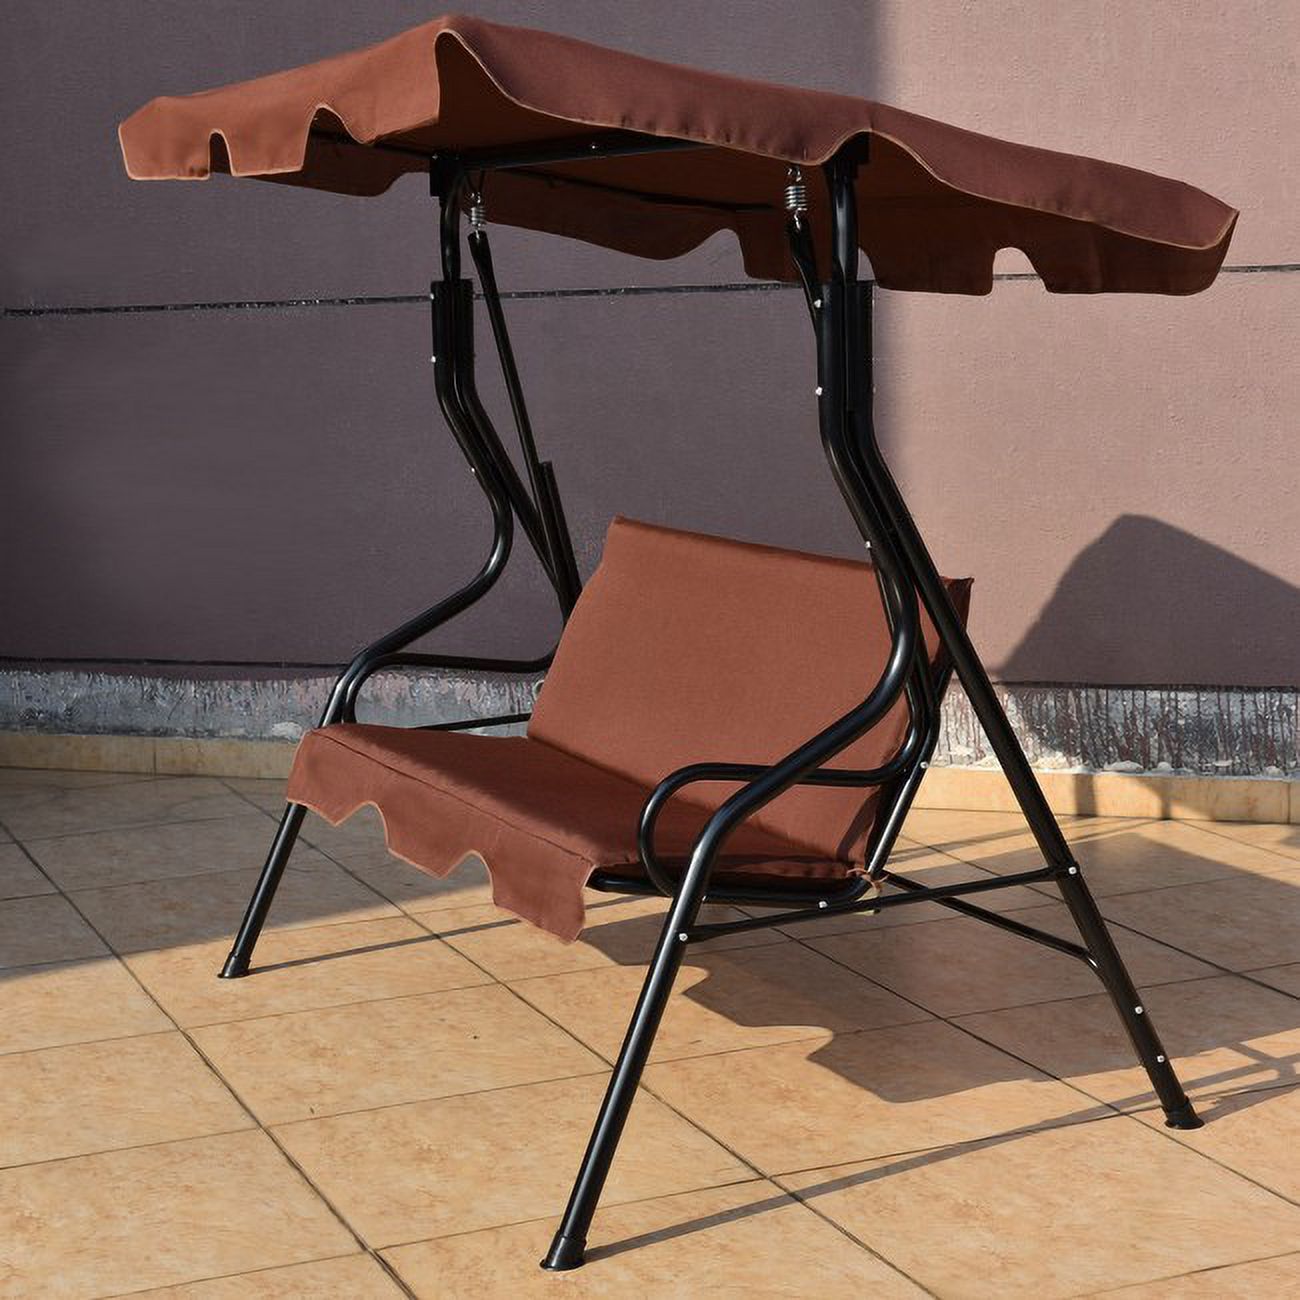 SUGIFT 3 Seat Canopy Swing with Cushioned Steel Frame Outdoor Garden Patio Lounge Chair - image 5 of 9